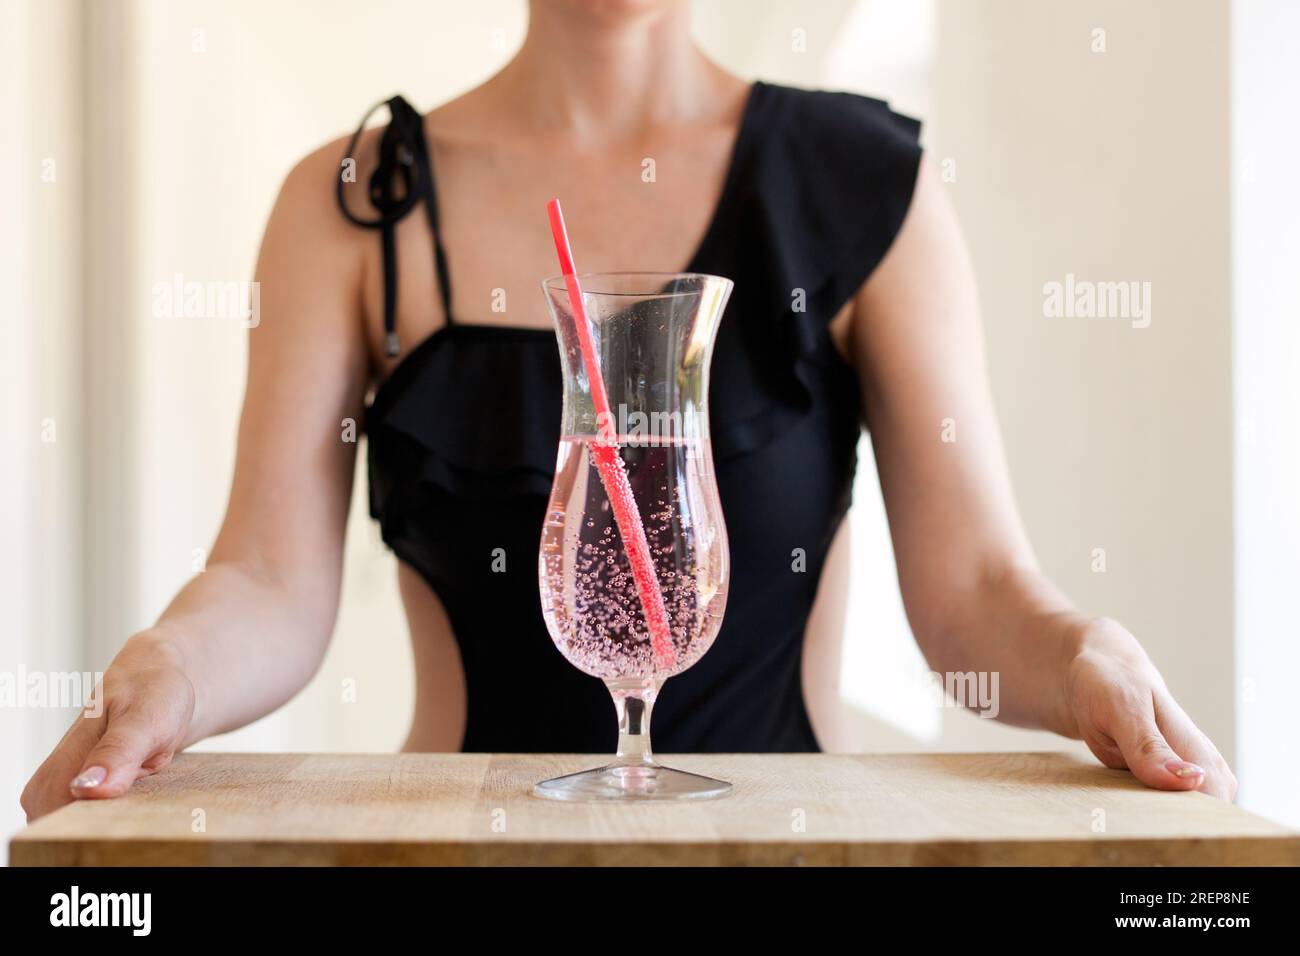 woman in swimsuit holding coctail glass with straw at table. Fruit lemonade healthy drinking beverage Close Stock Photo